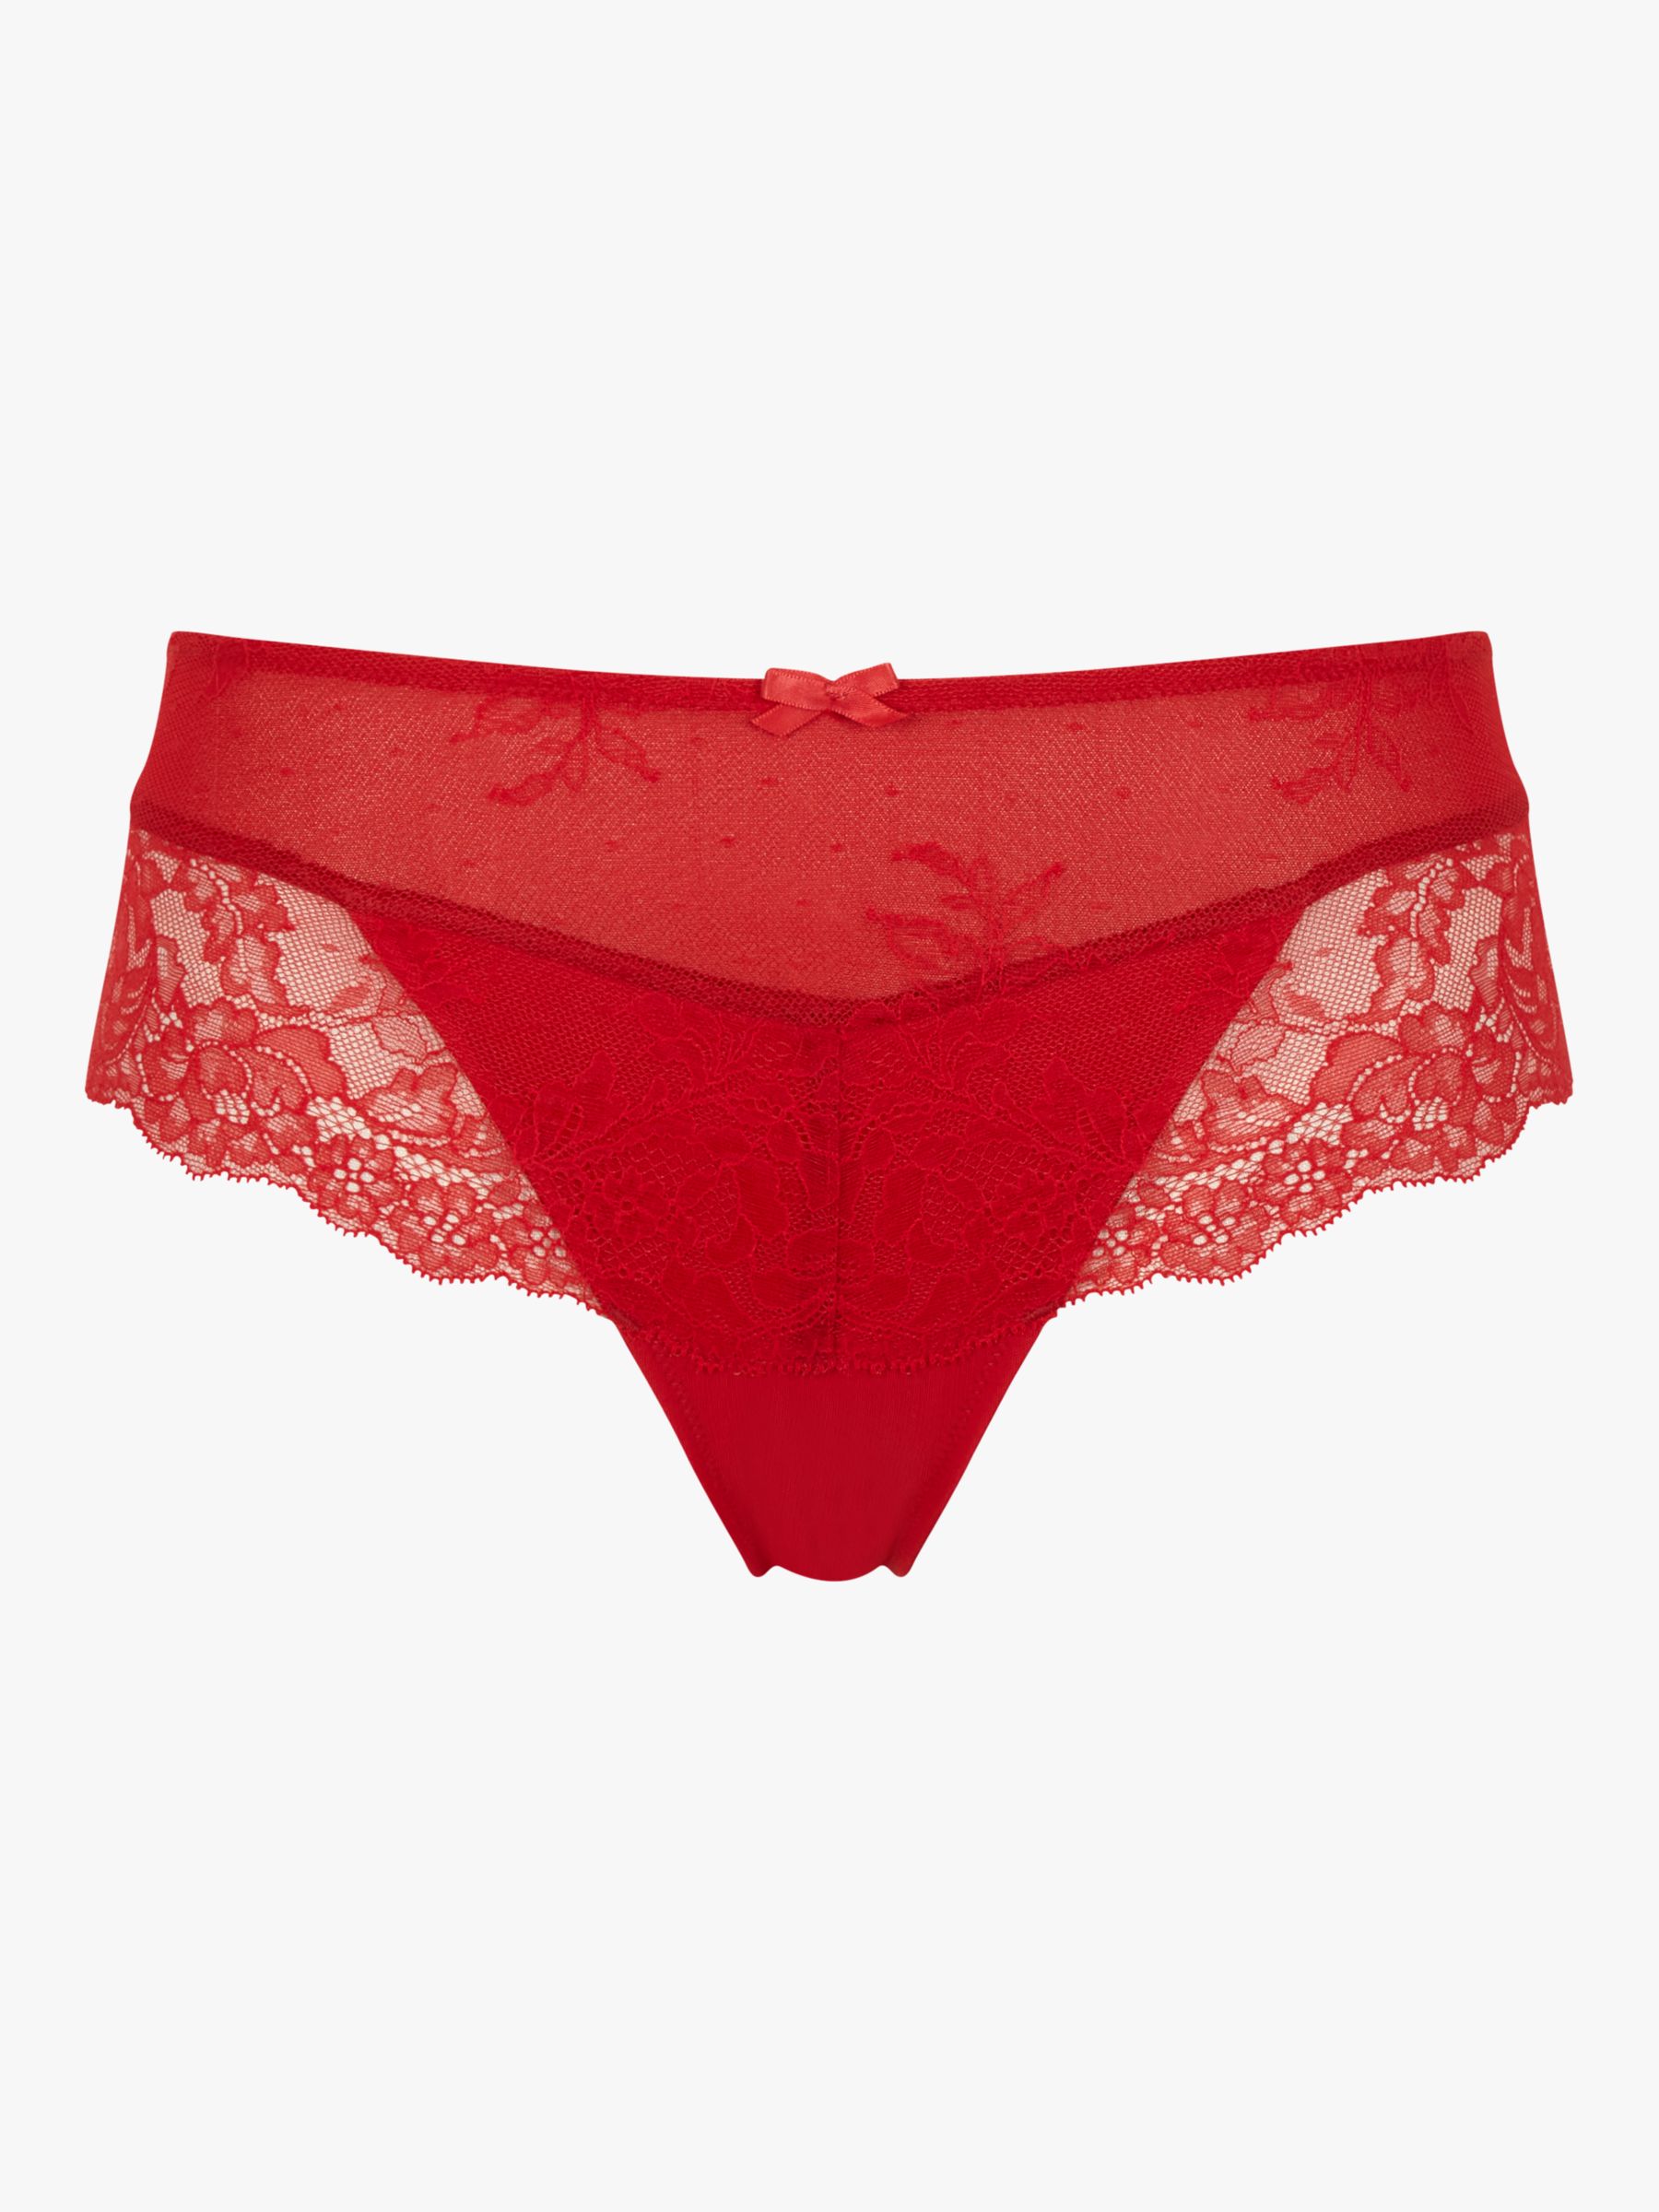 Buy Knickers Red Lace Online